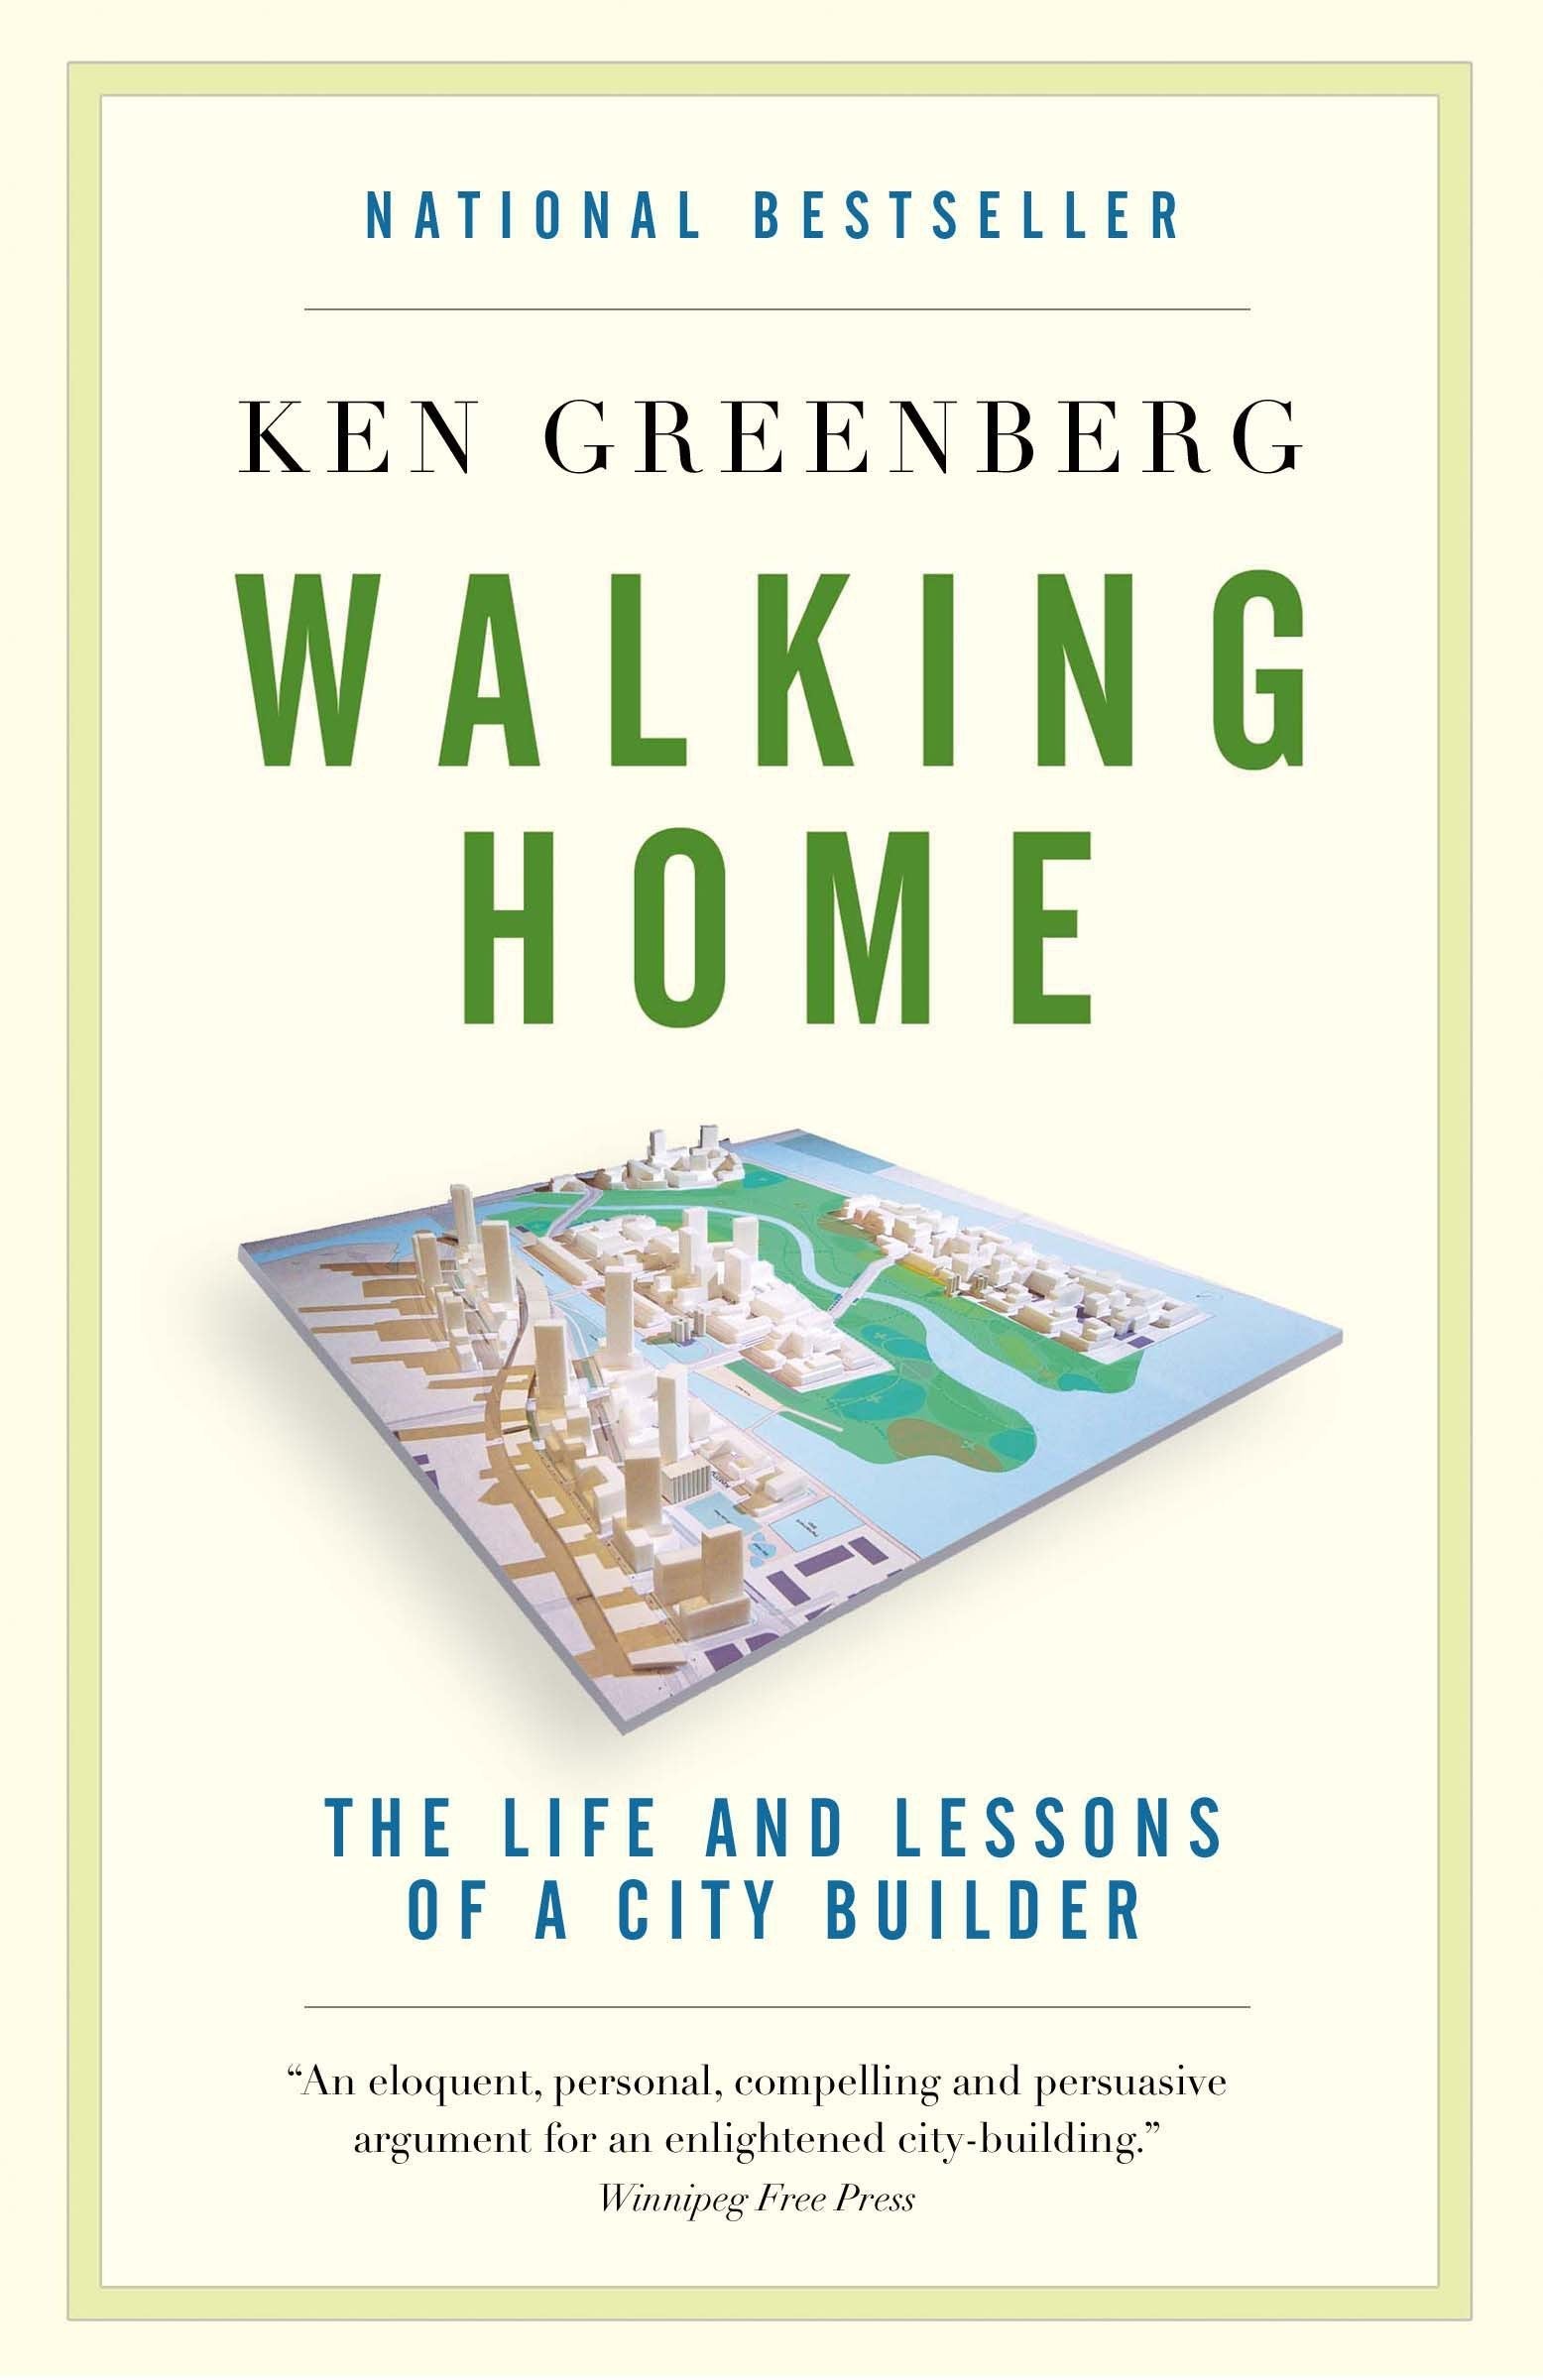 “Life and Lessons of a City Builder” - Ken Greenberg virtual event